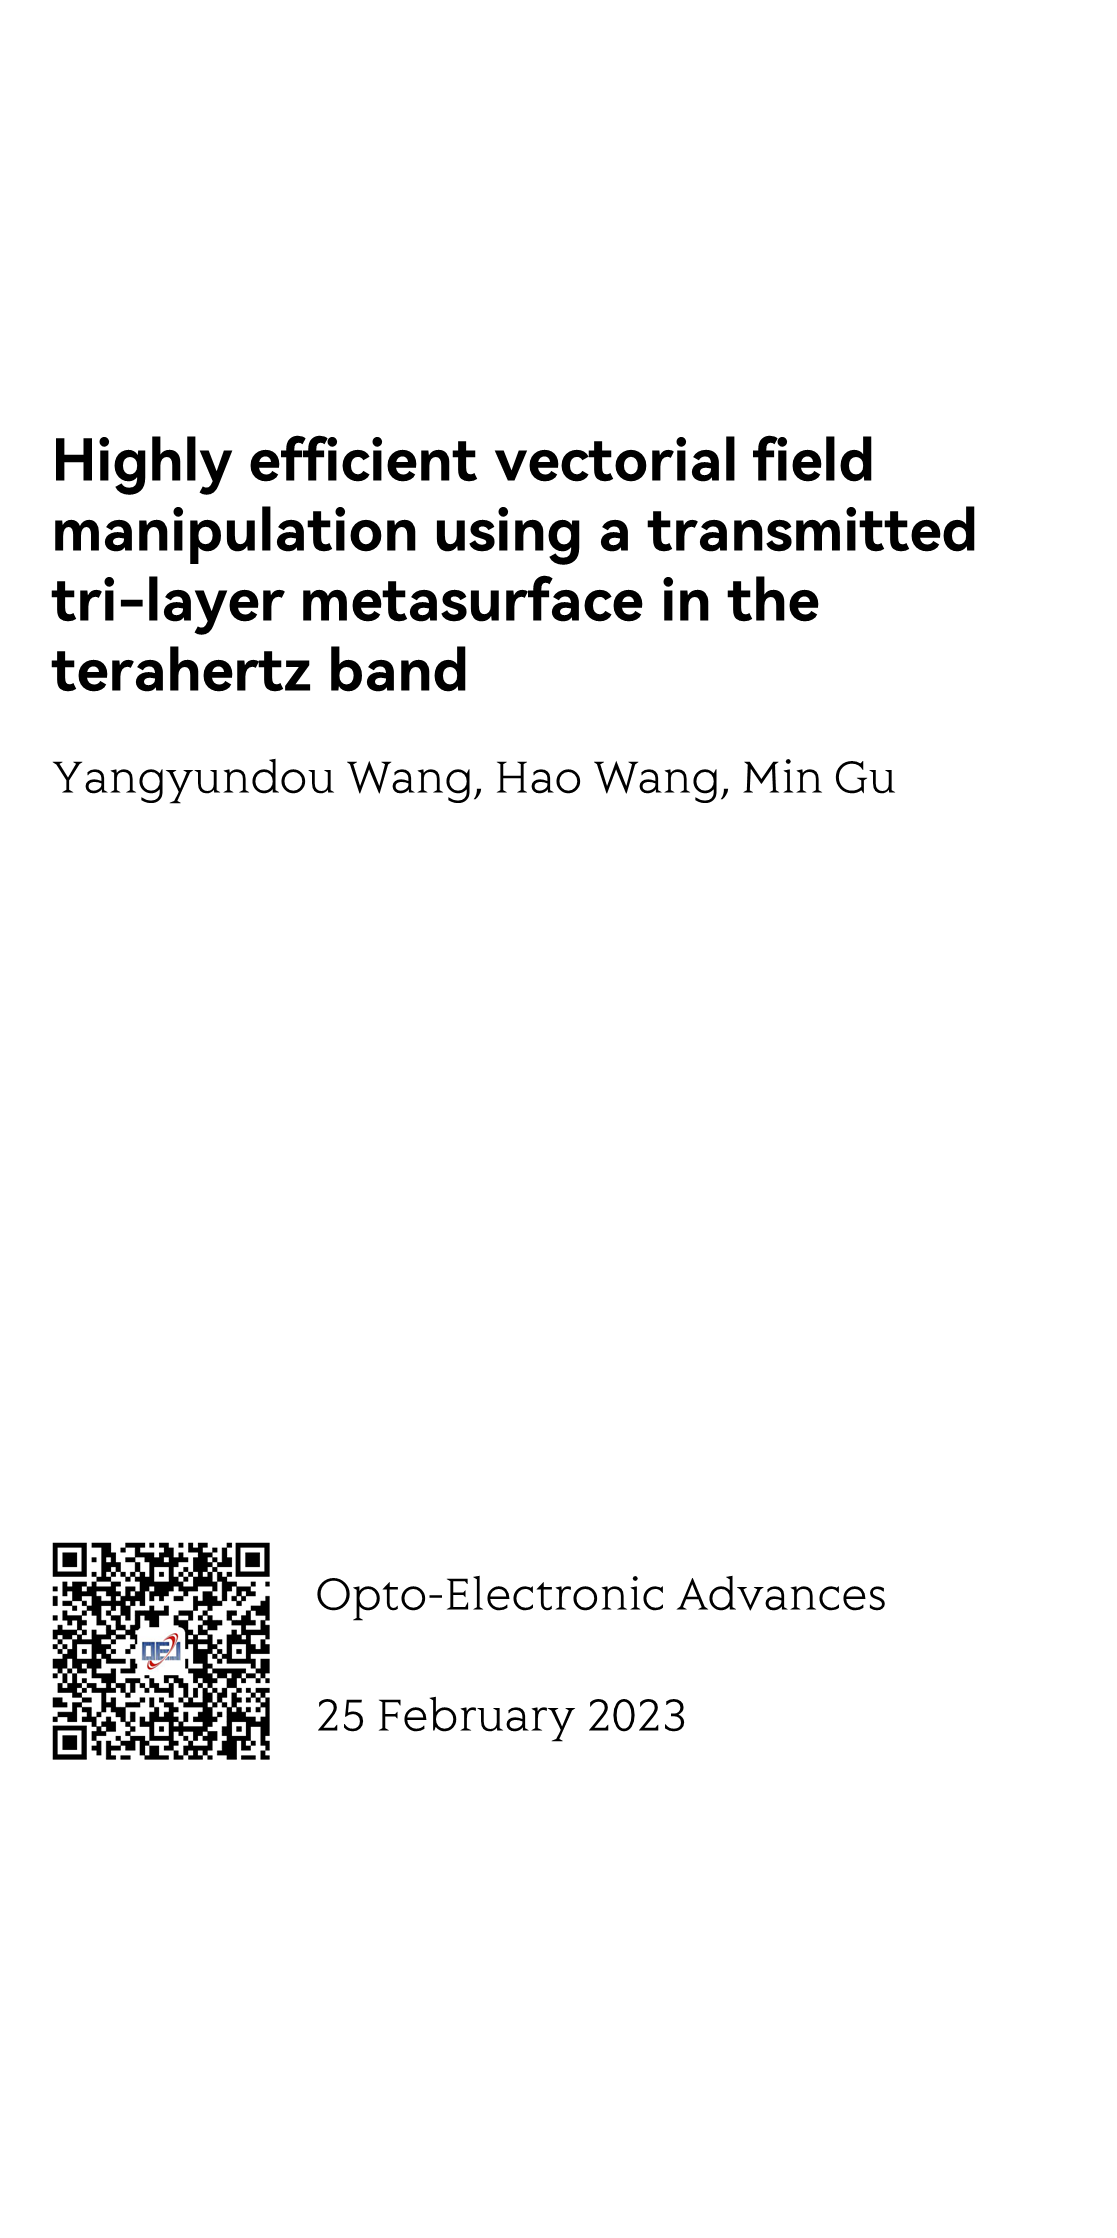 Highly efficient vectorial field manipulation using a transmitted tri-layer metasurface in the terahertz band_1